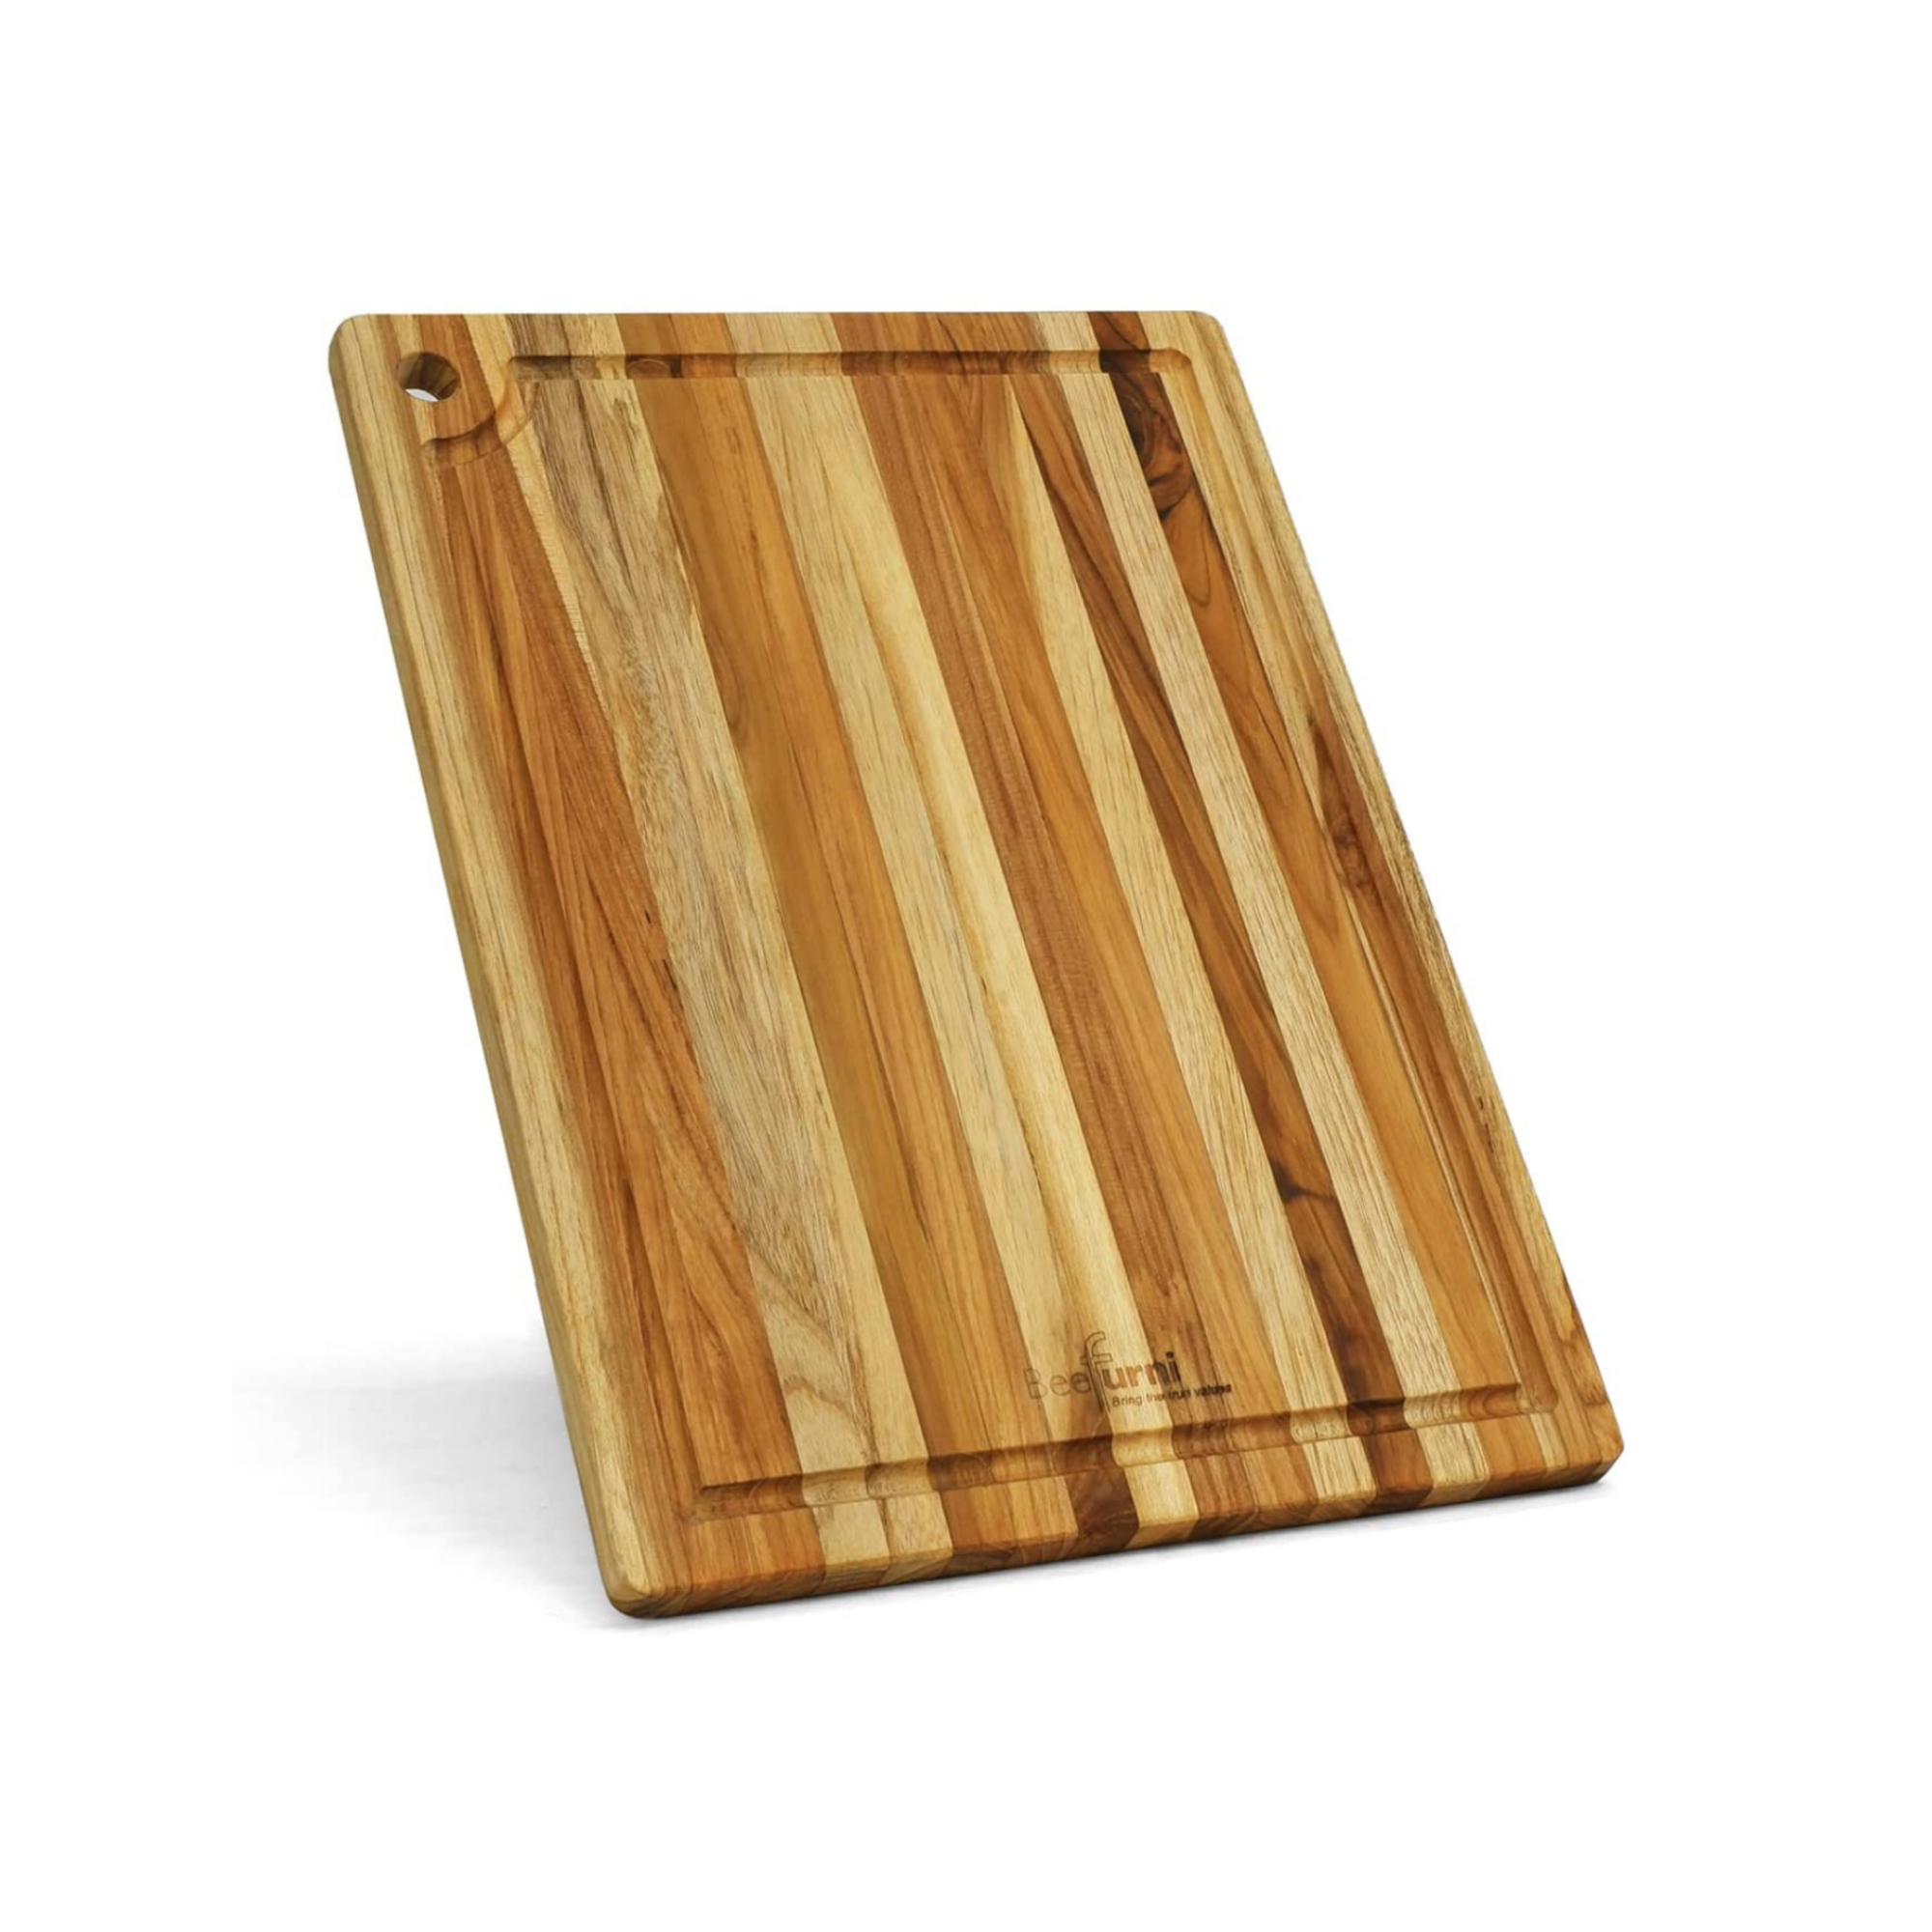 Teak Cutting Board Reversible Chopping Serving Board Multipurpose Food Safe Thick Board, Small Size 14x10x0.6 inches